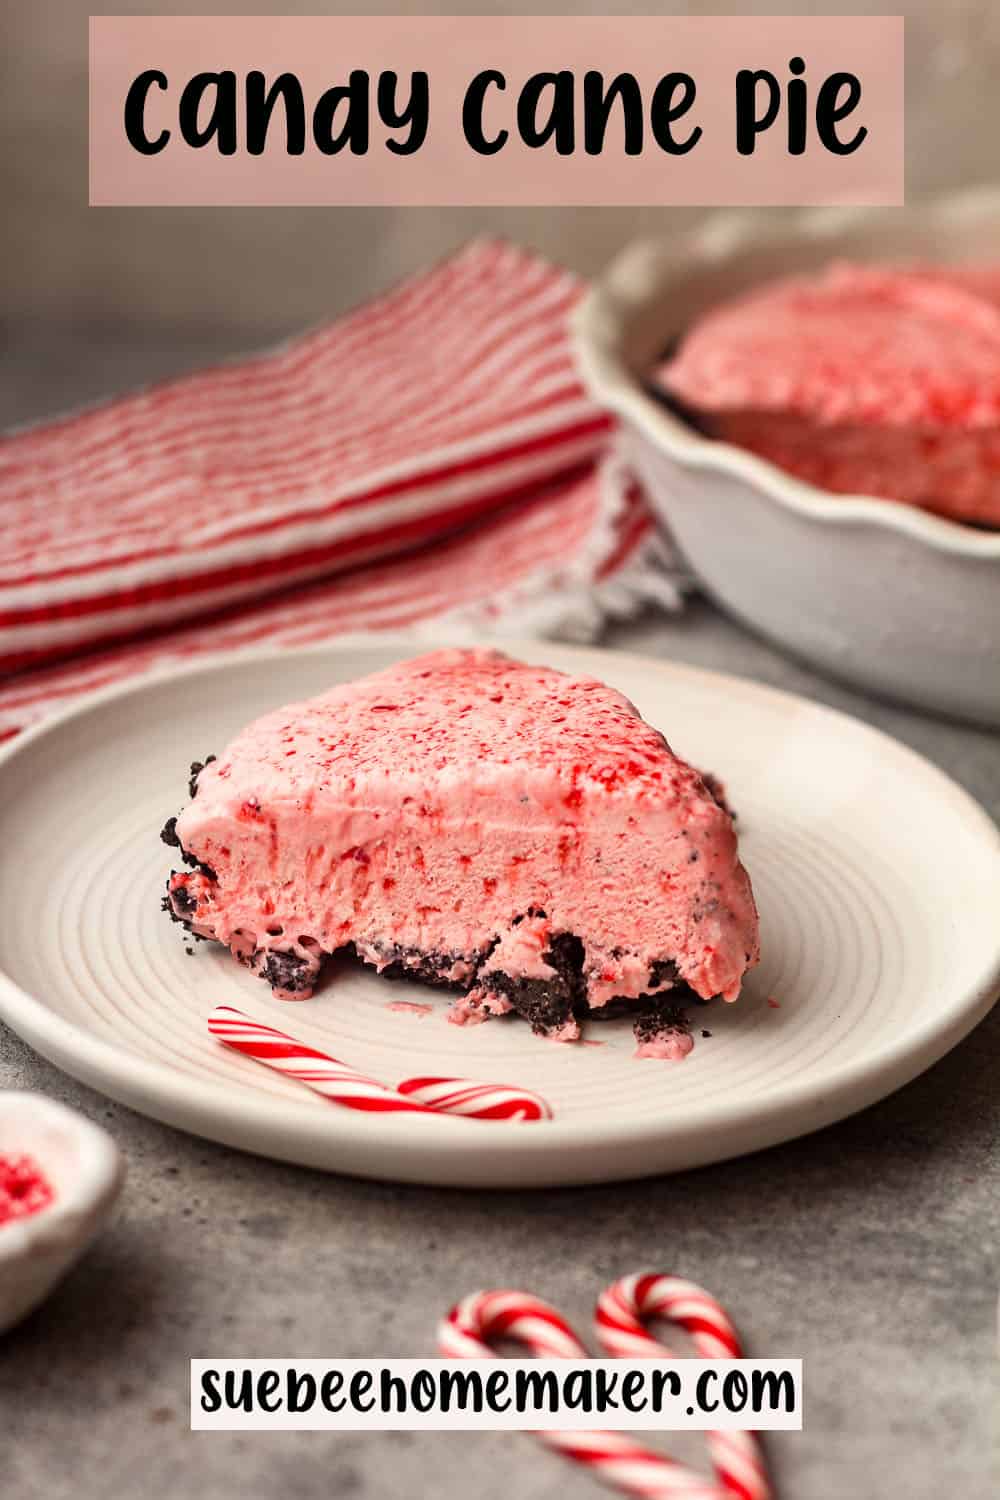 A slice of candy cane pie on a plate.